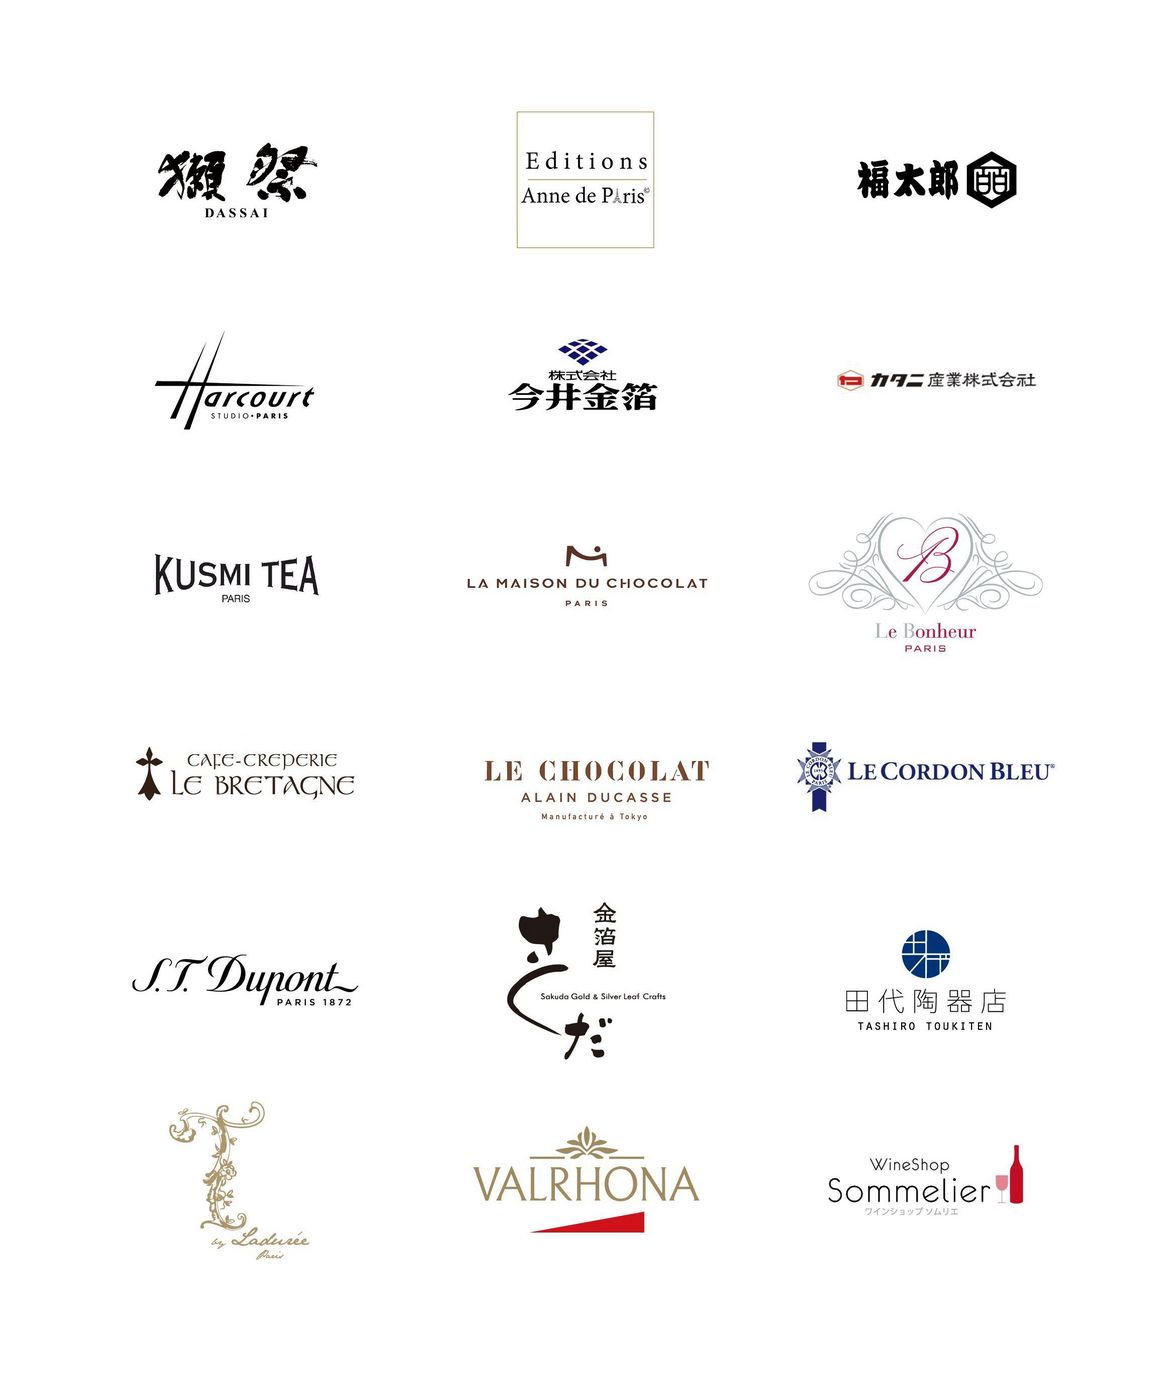 Brands participating